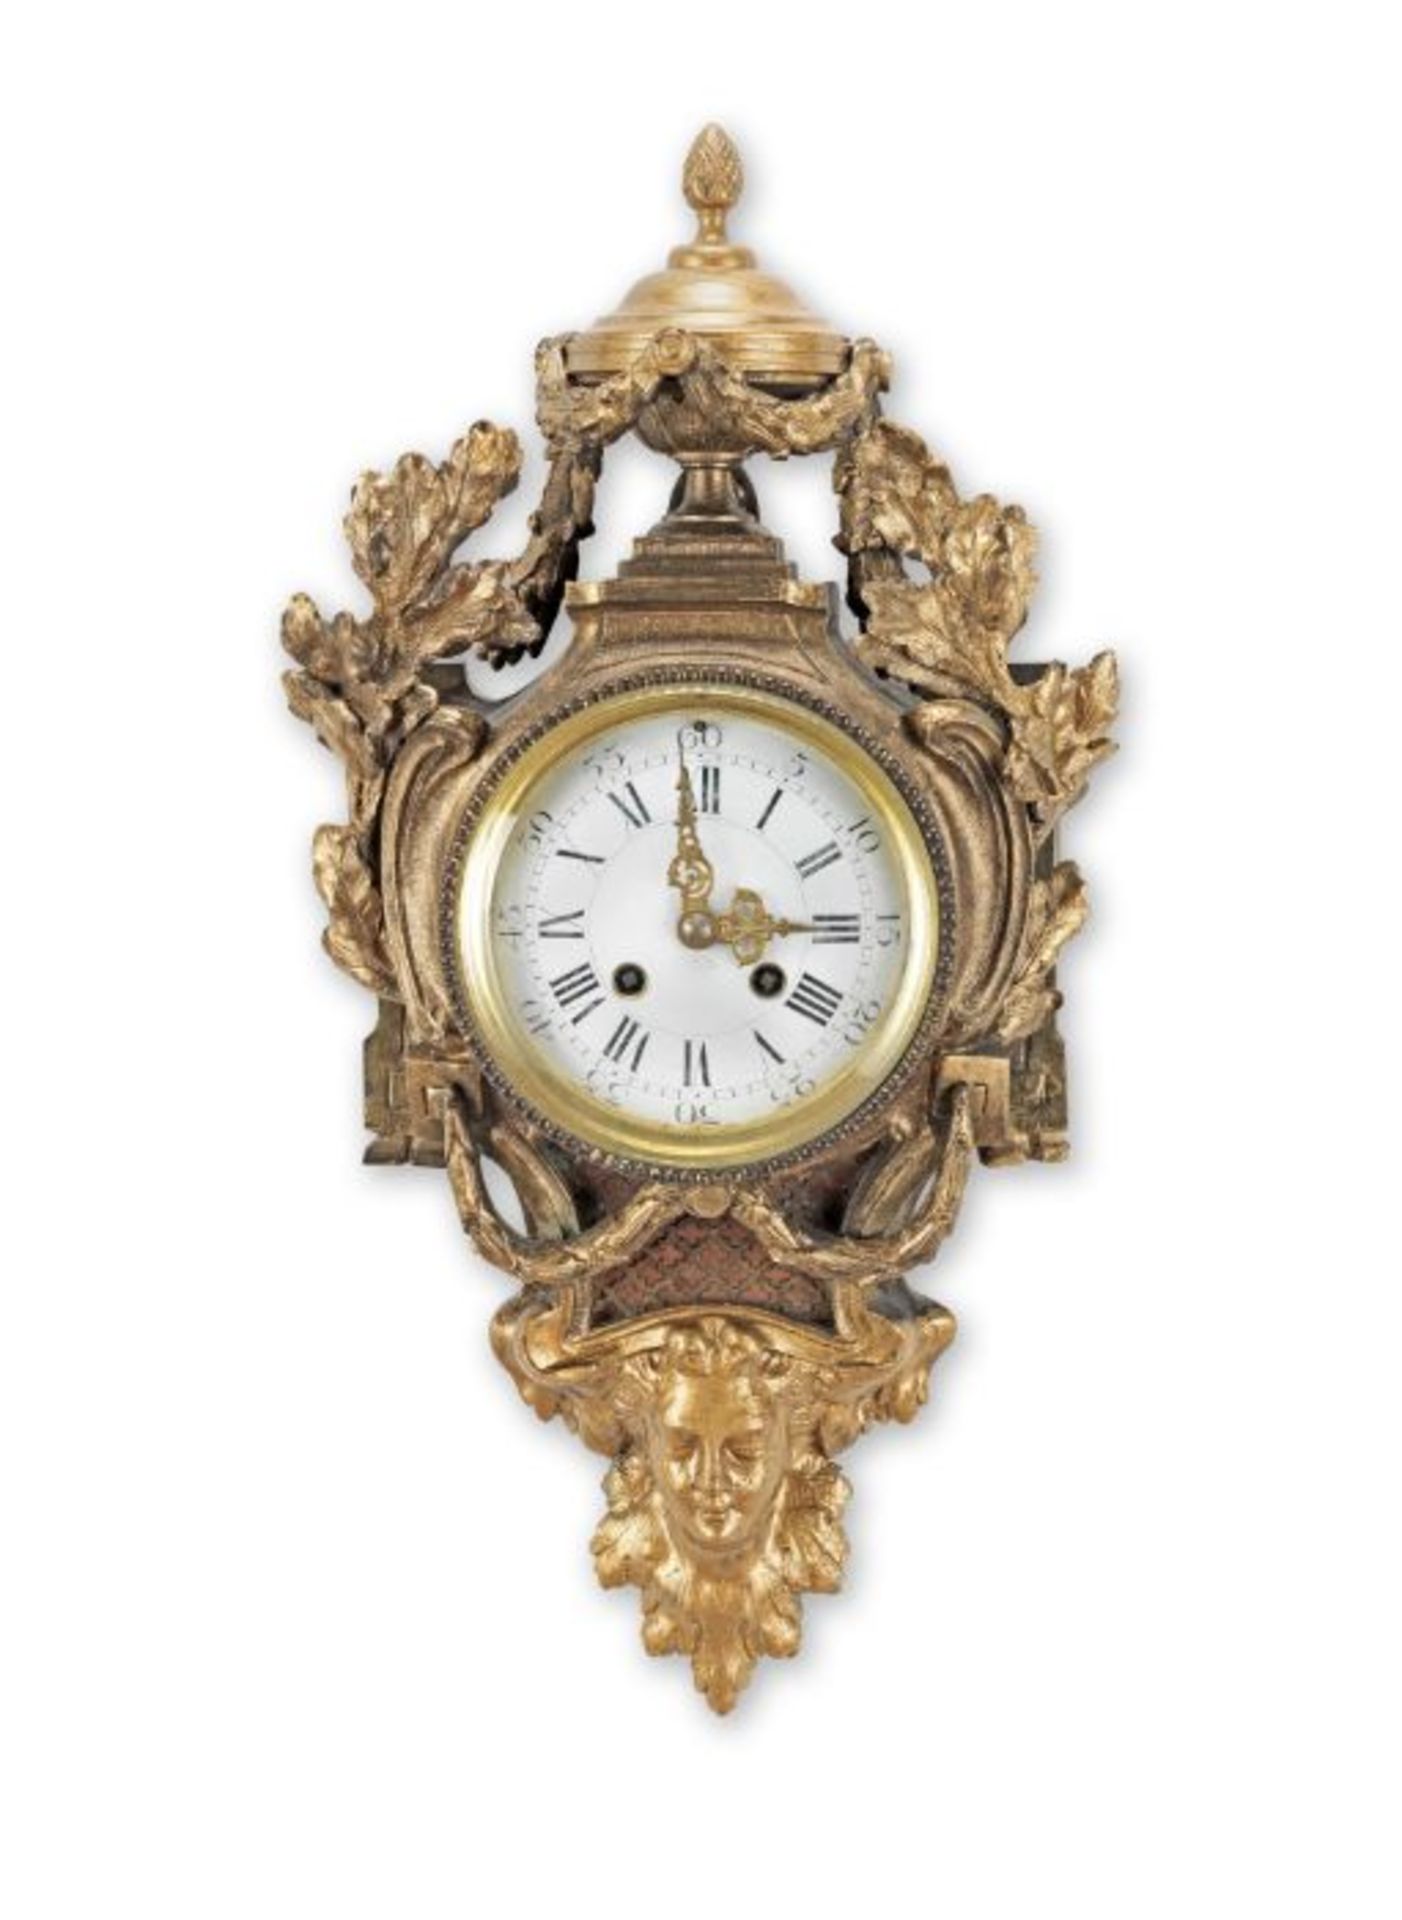 A late 19th century French Louis XVI style gilt bronze cartel clock - Image 3 of 3